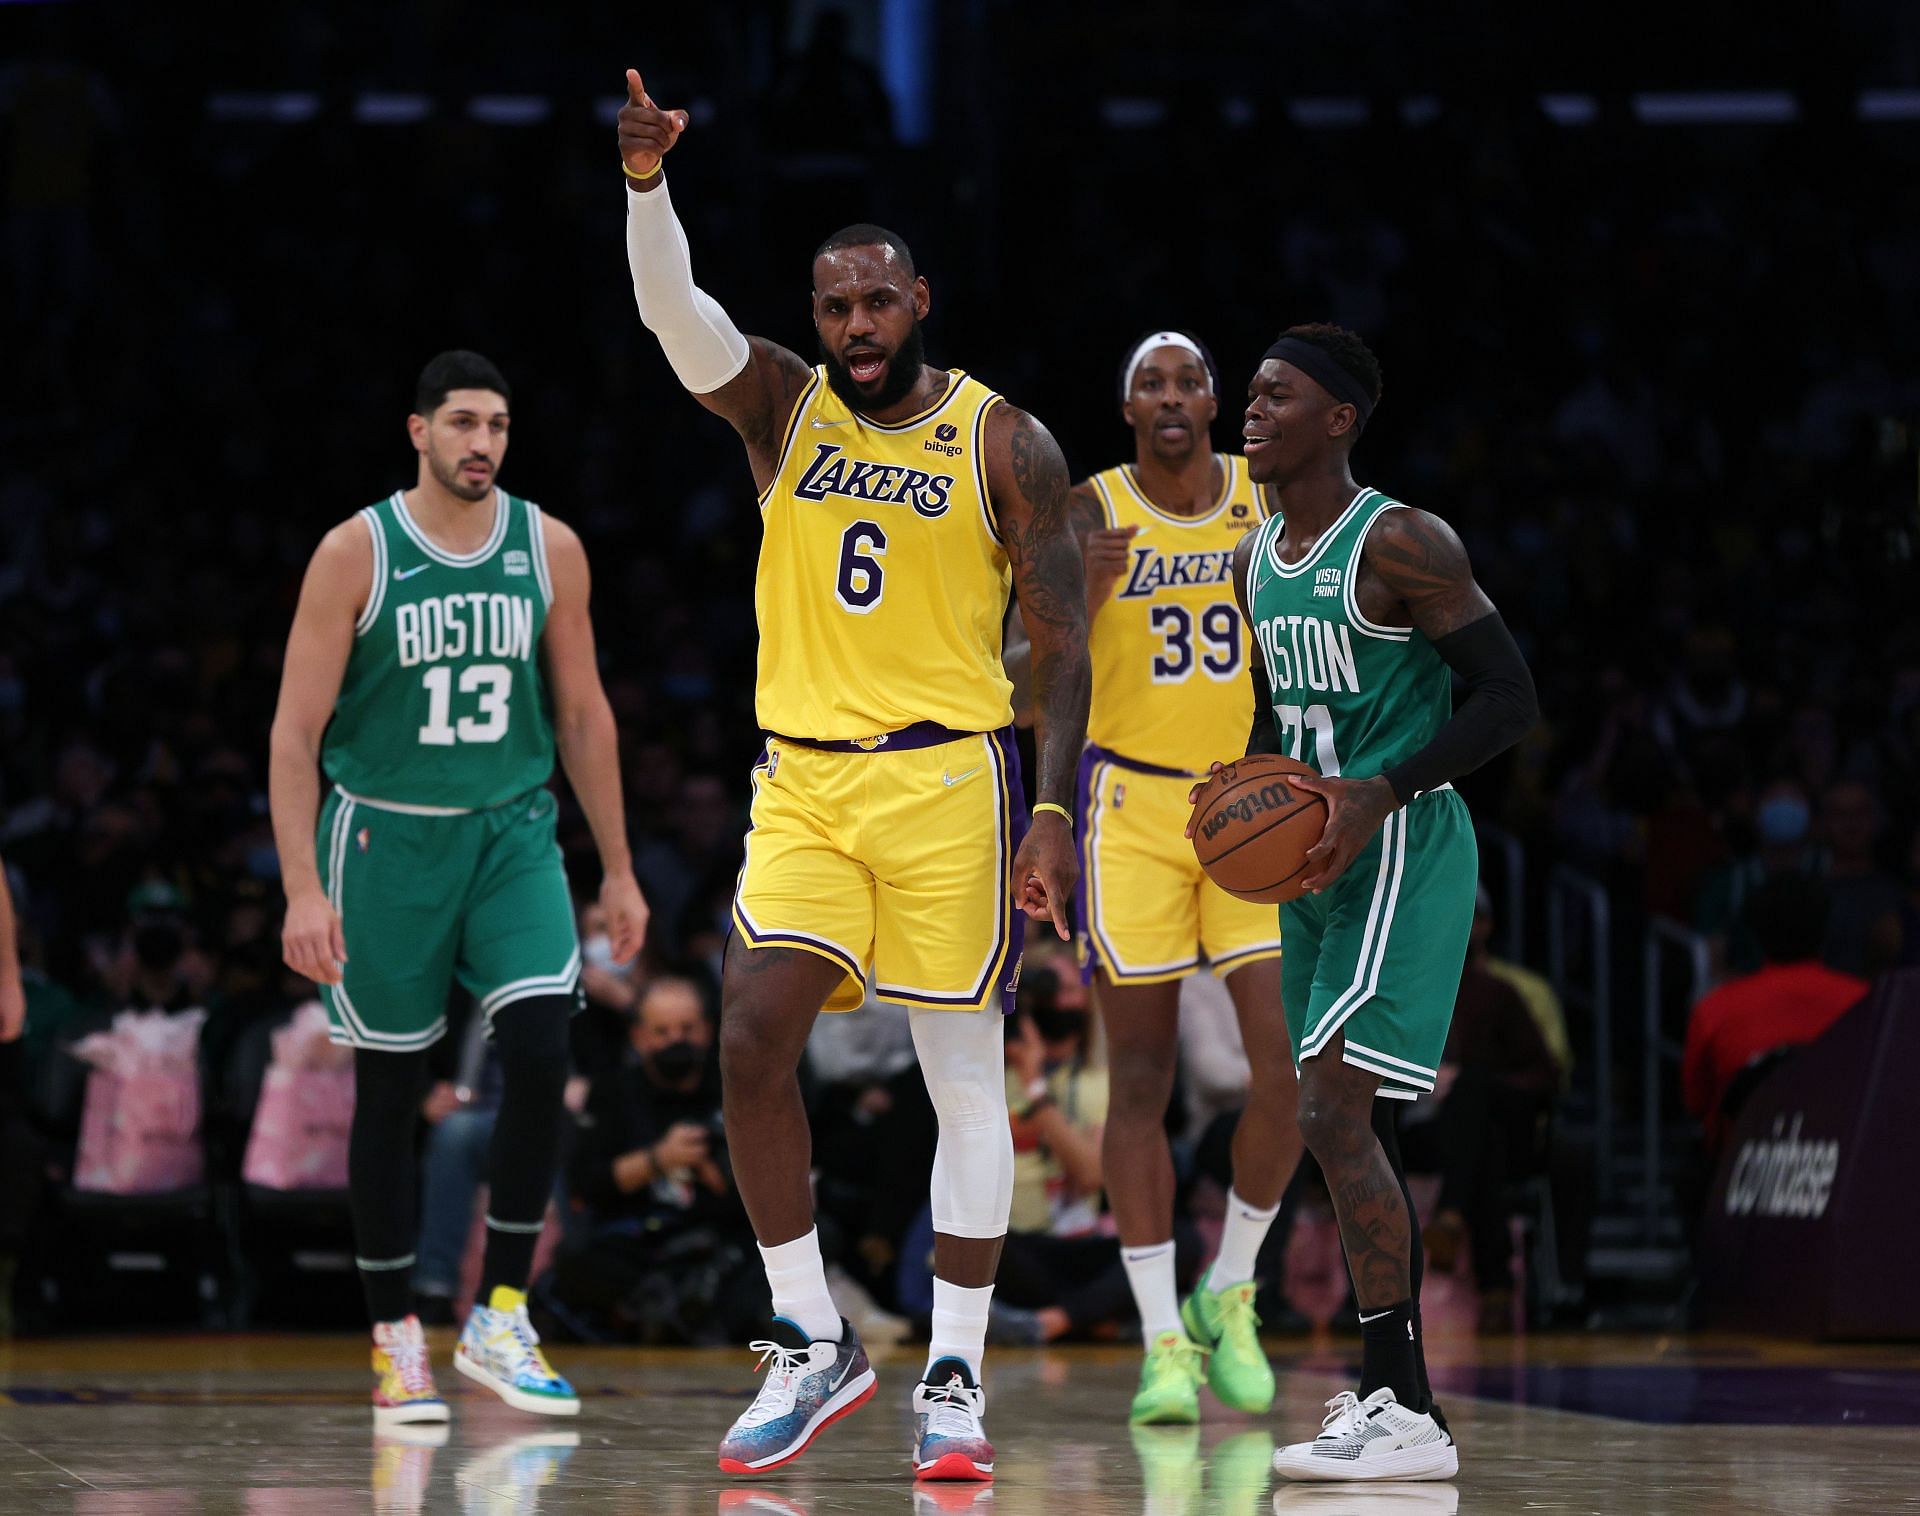 LeBron James of the LA Lakers reacts to an offensive foul on Dennis Schroder (71) of the Boston Celtics